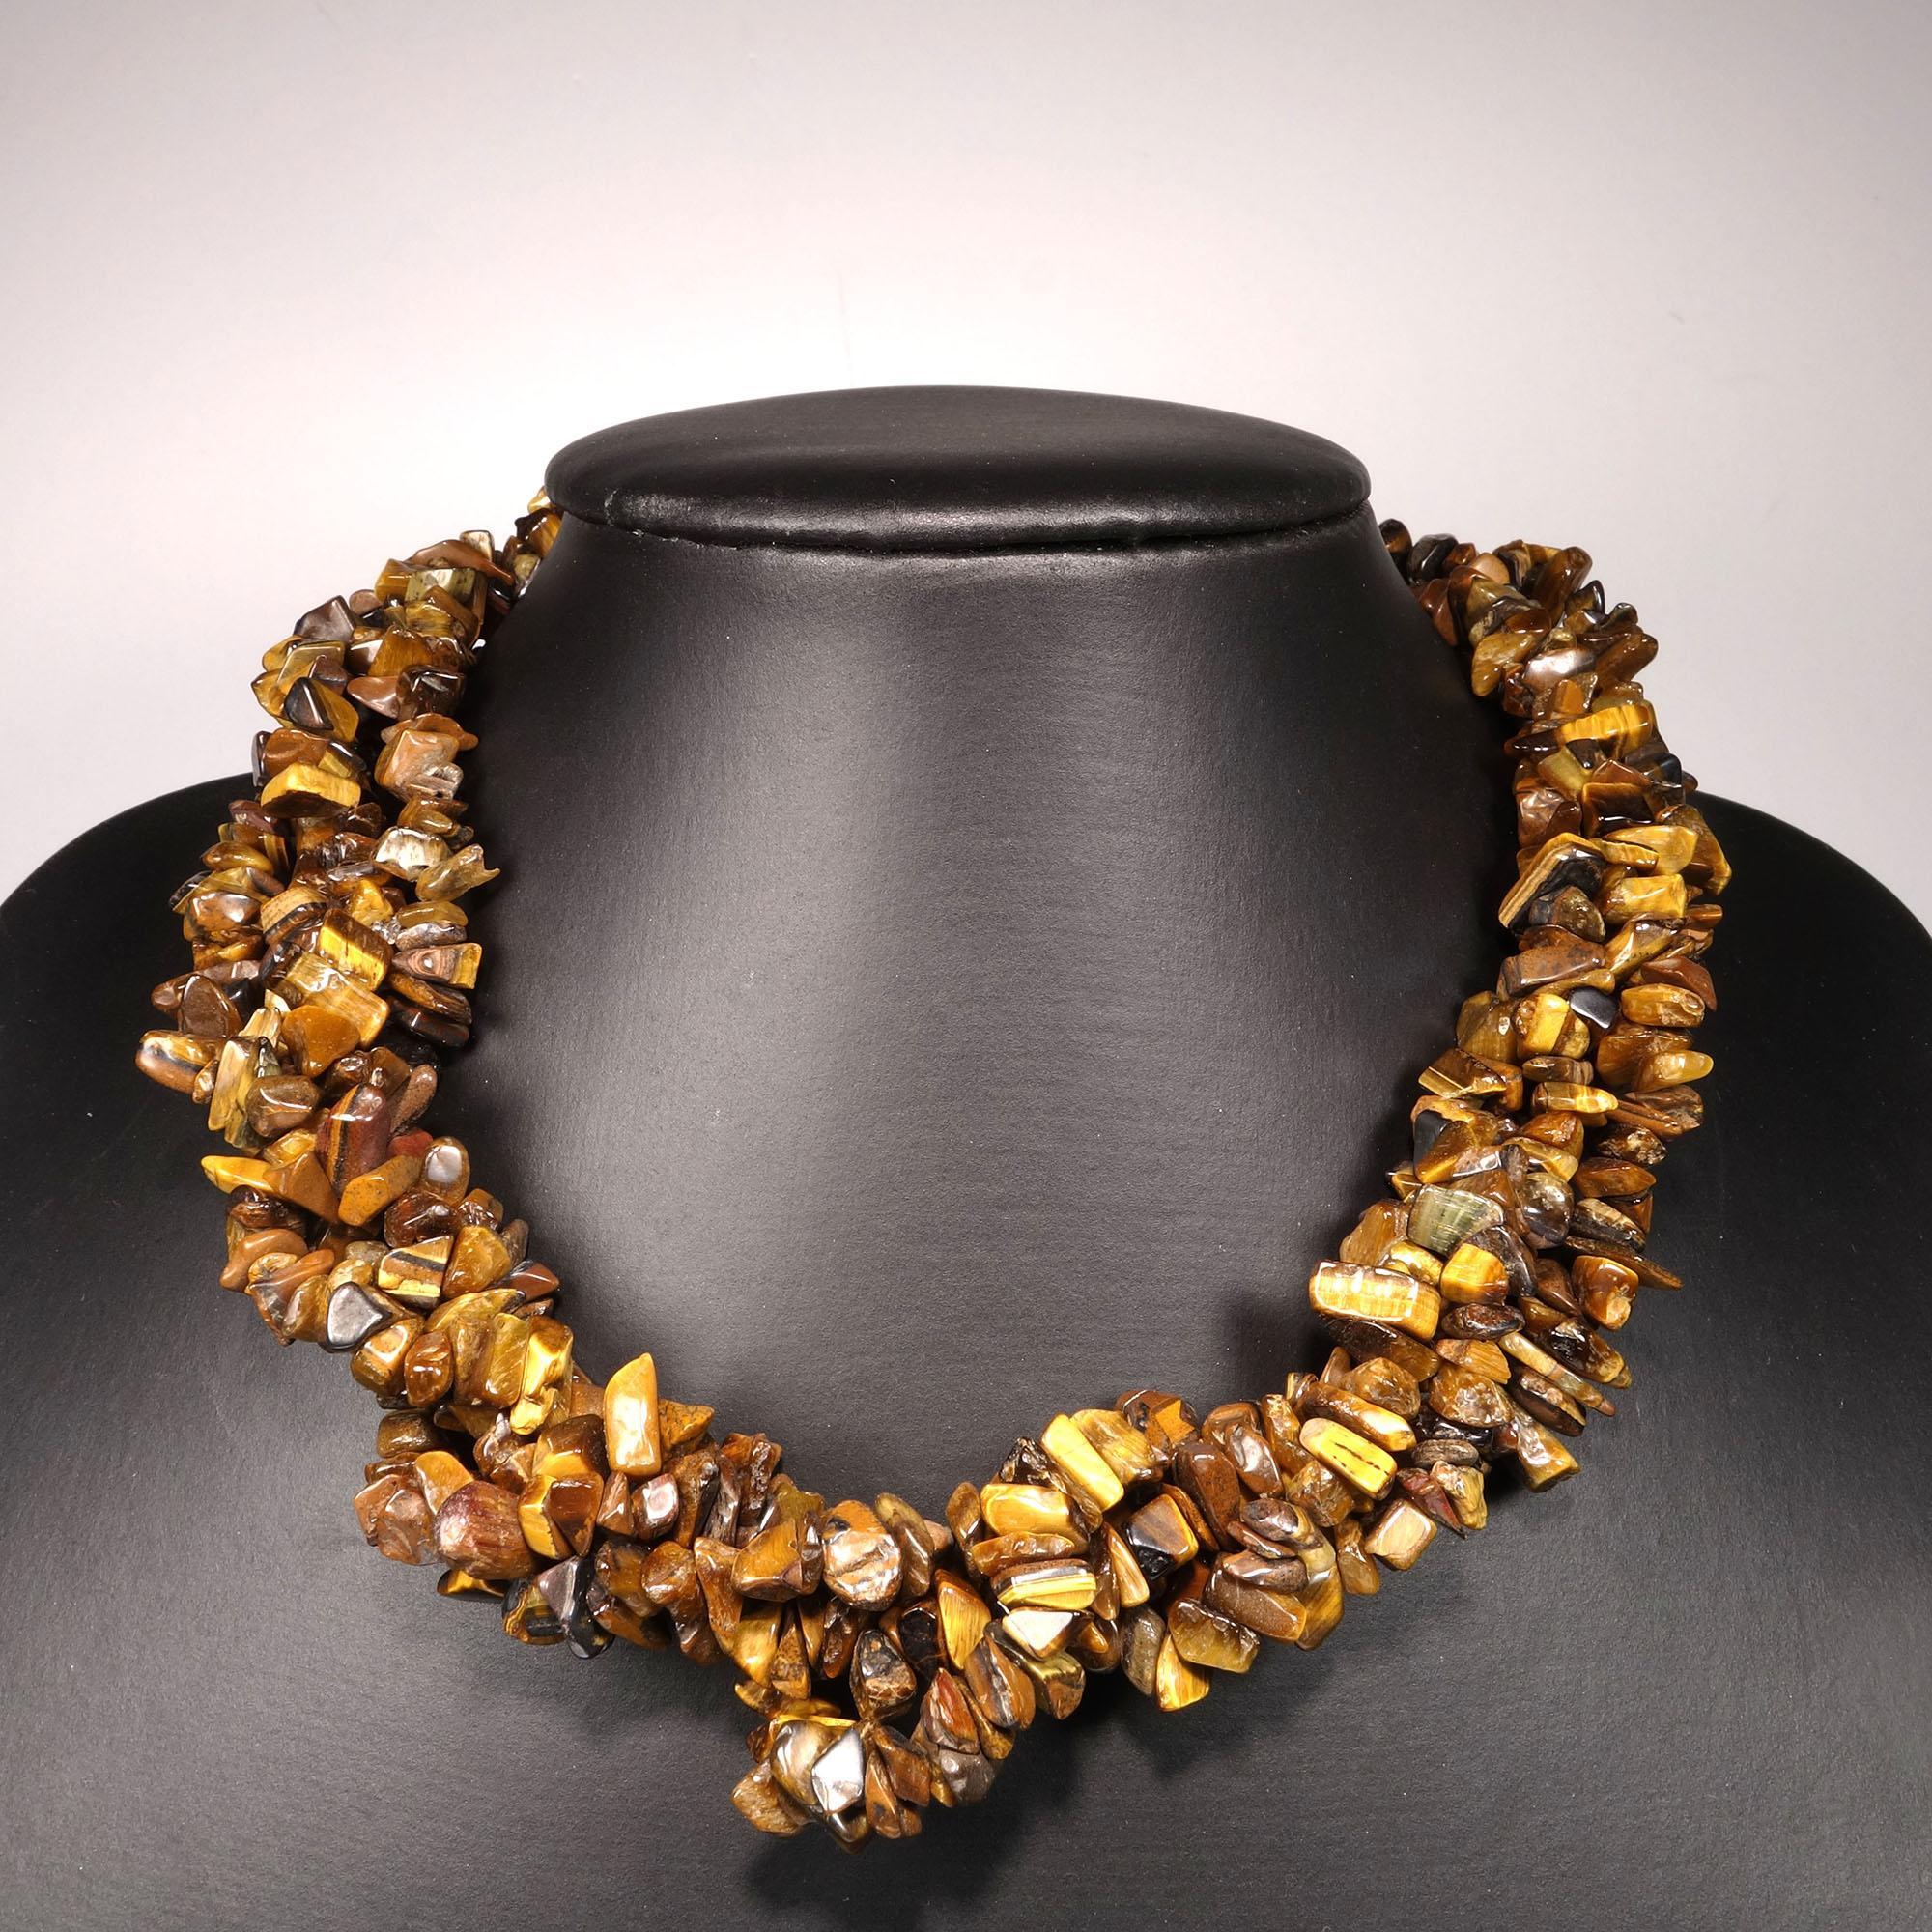 Bead AJD Multi Strand Brown Chatoyant Tiger's Eye Necklace